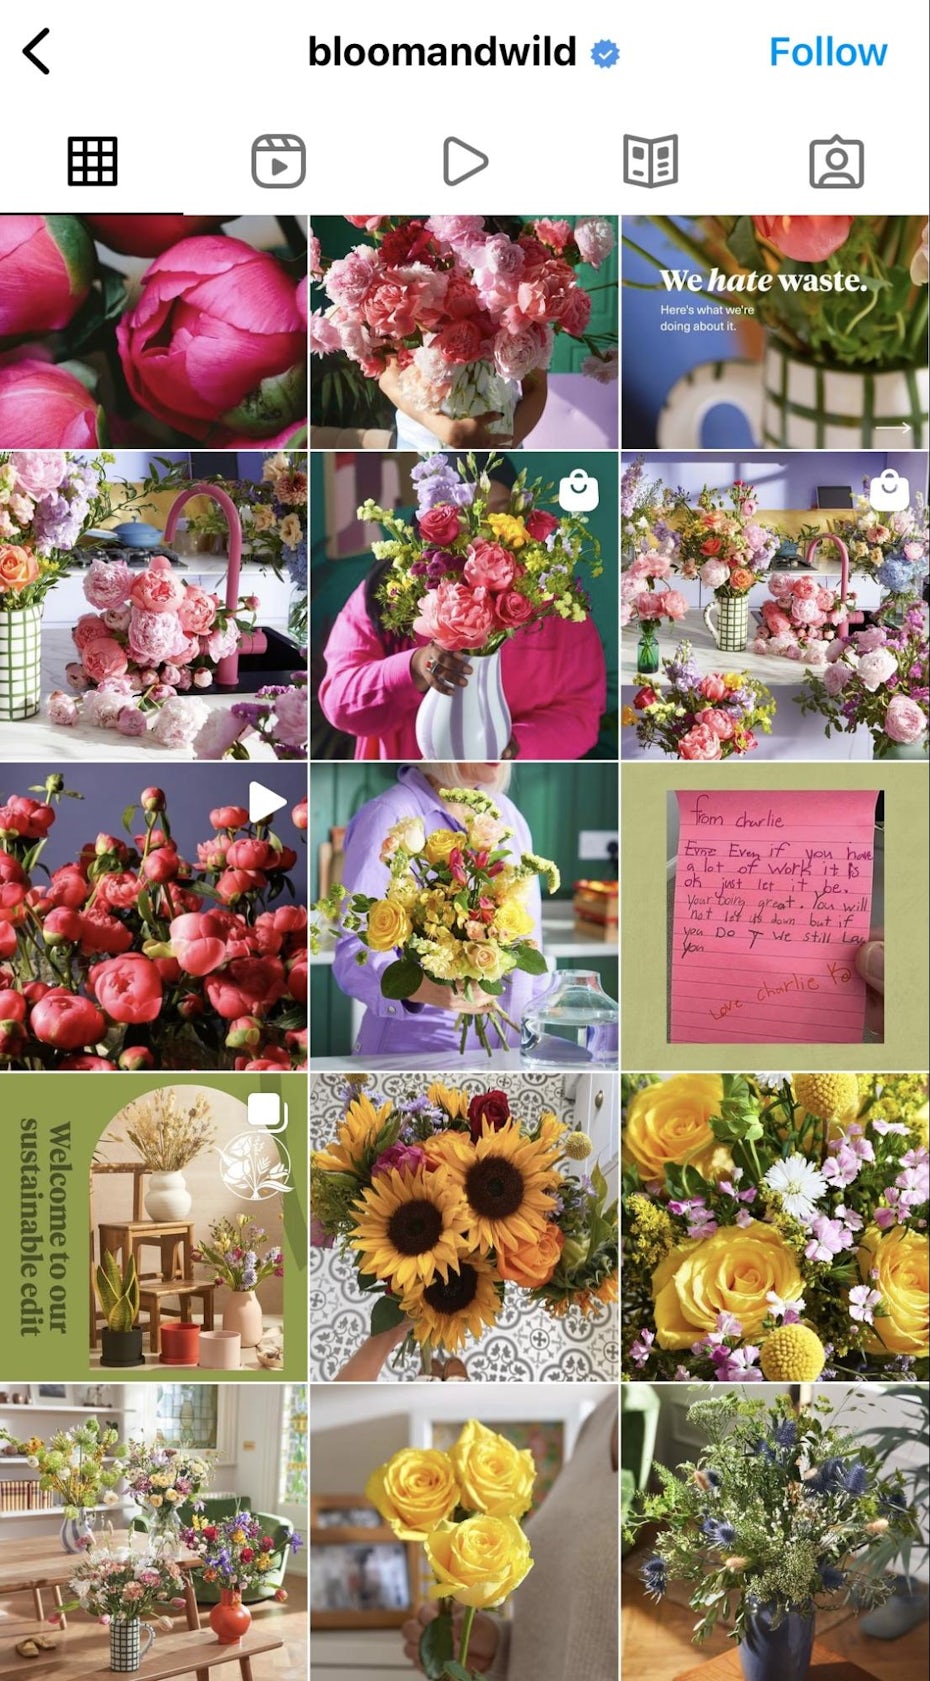 Bloom and Wild Instagram feed